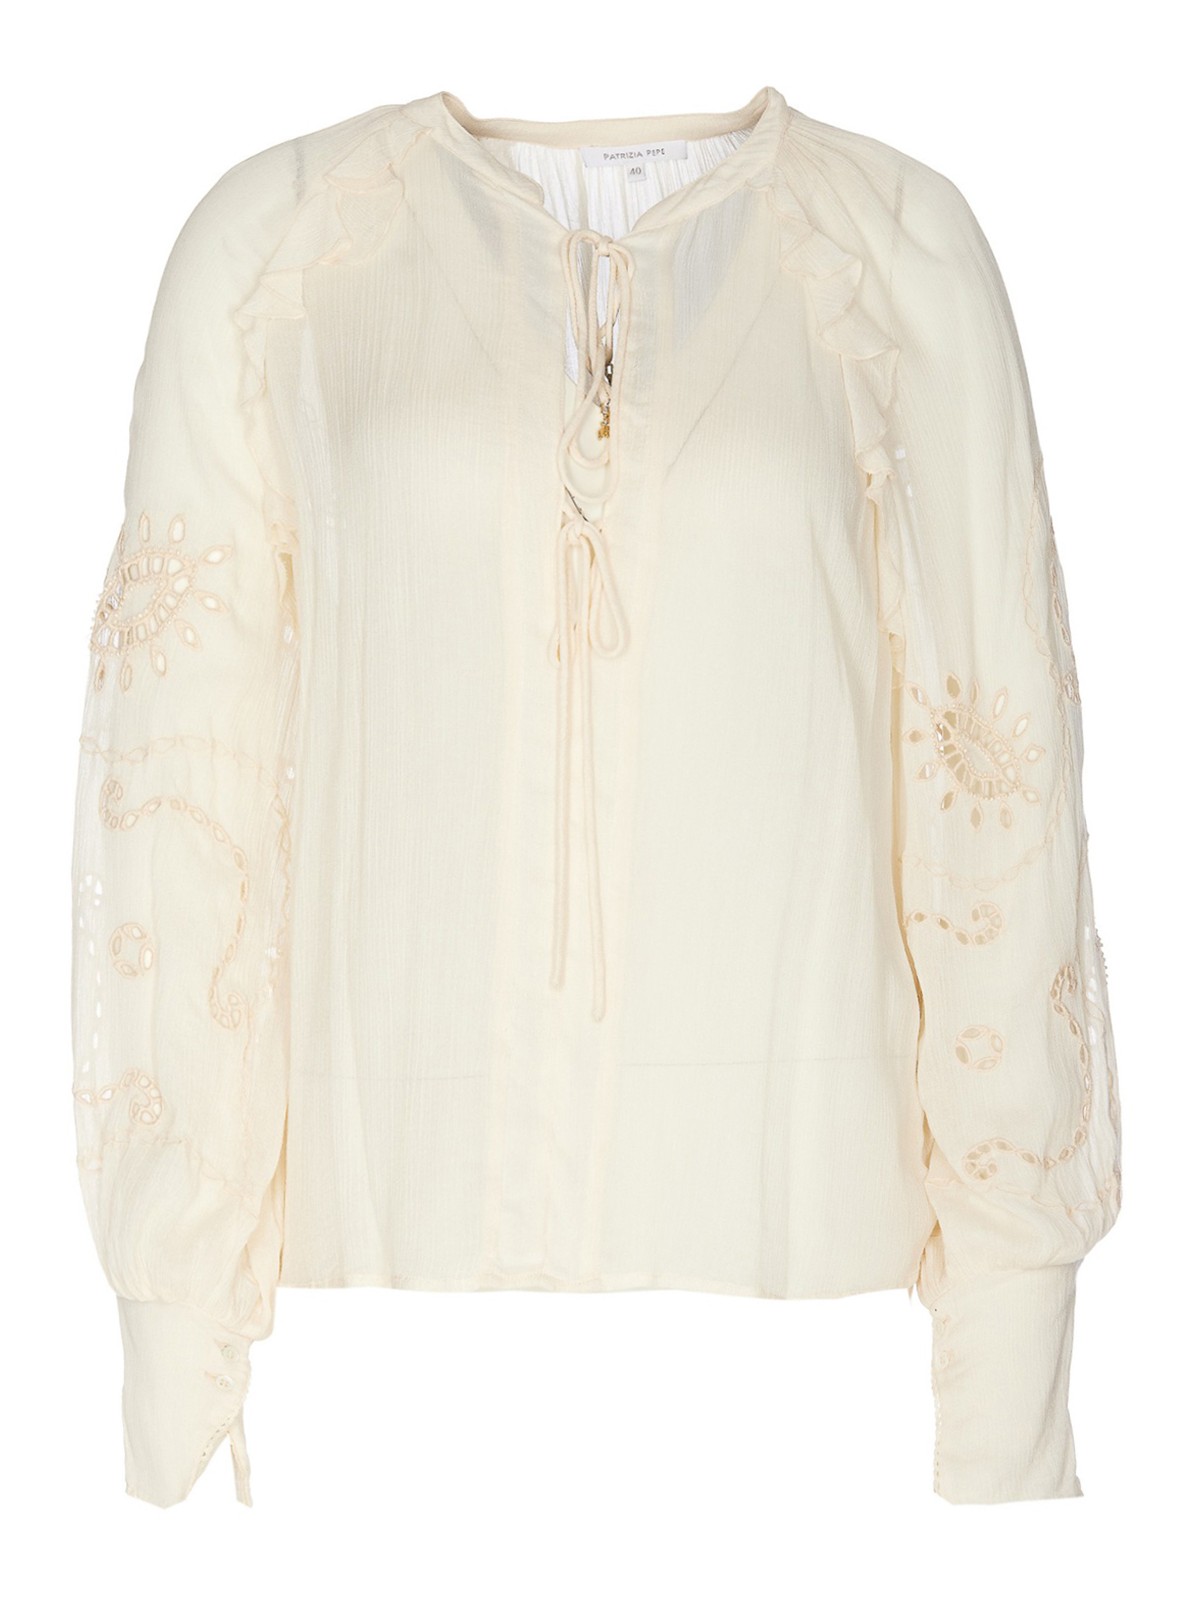 Patrizia Pepe Embroidered Blouse With Sheer Effect In White